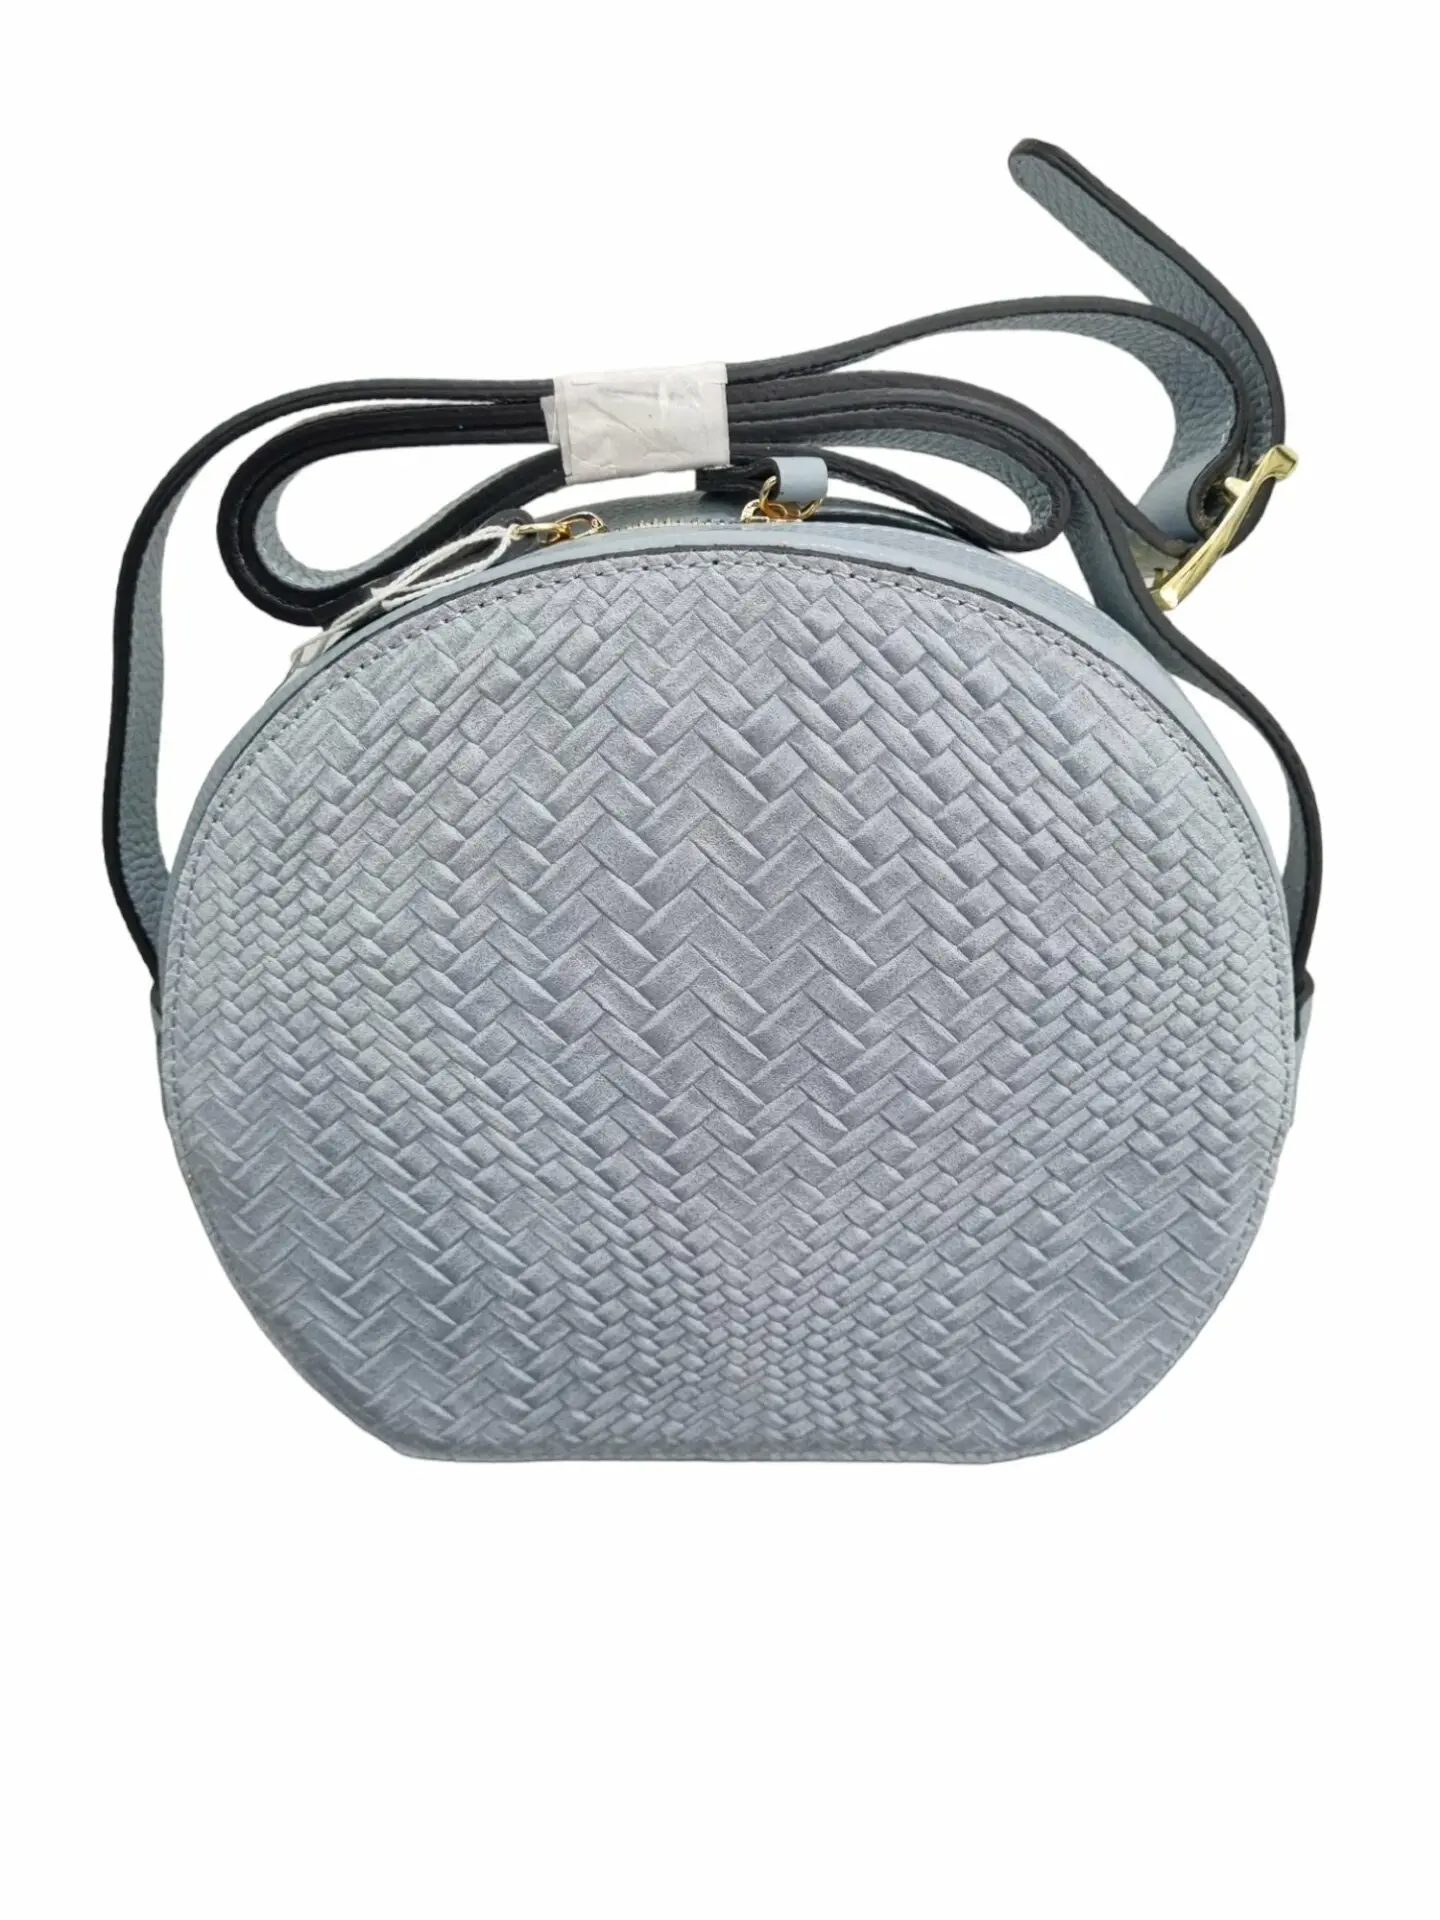 Shoulder bag in real leather woven on the front and back, made in Italy, single compartment in suede interior, zip opening. Wide adjustable shoulder strap. powder color (pastel light blue) measures H21 B 7 L17/24